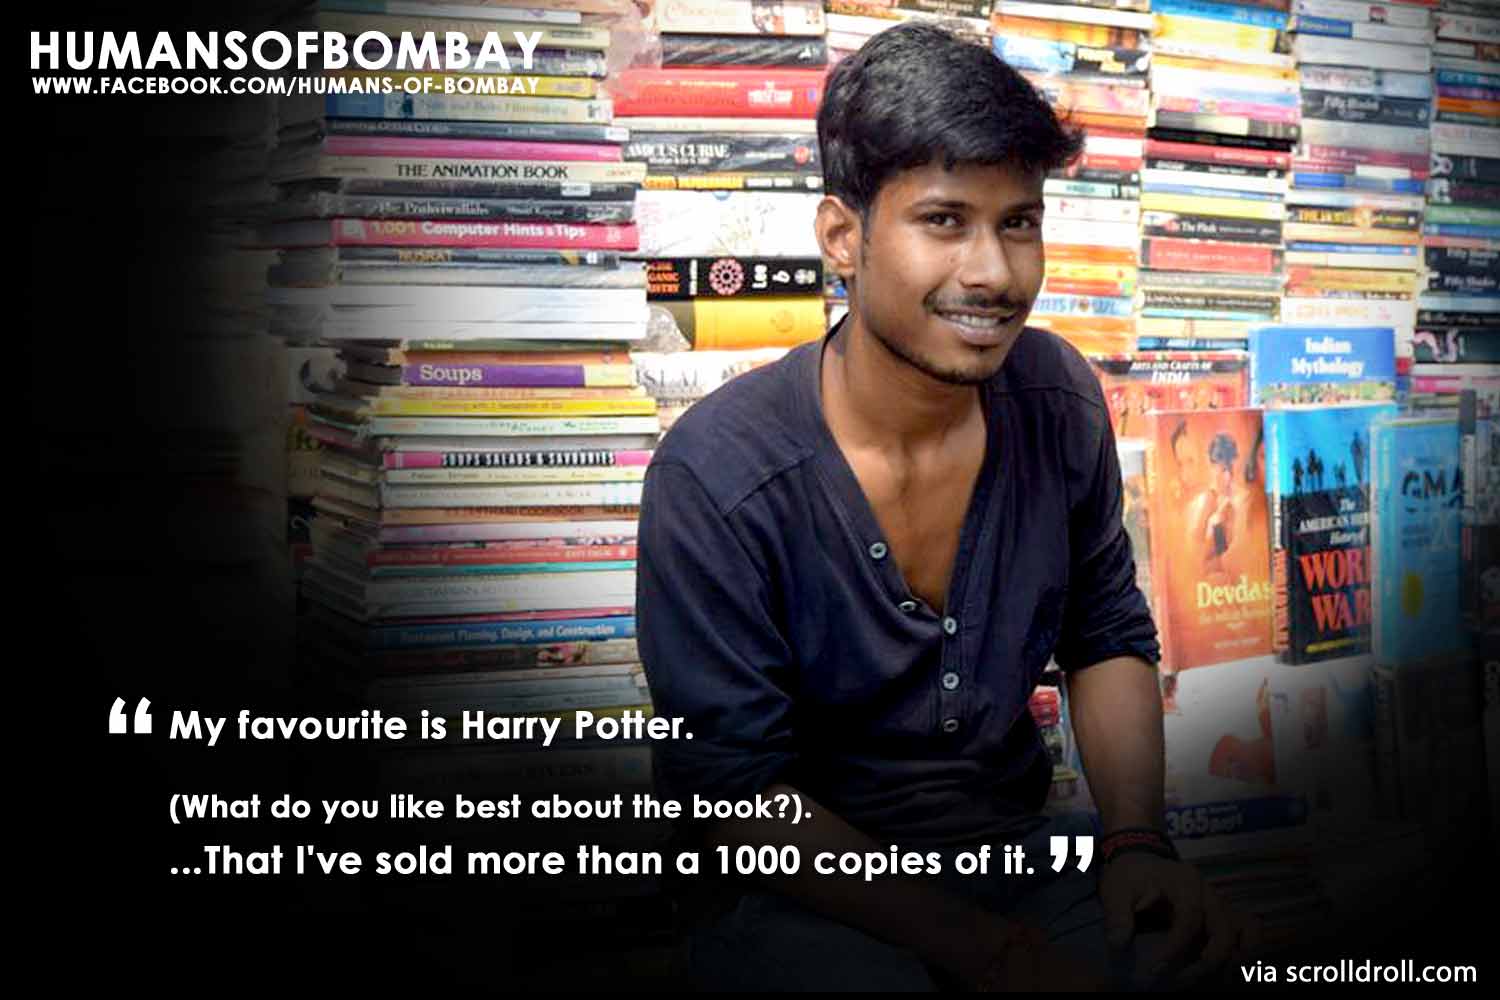 Humans of Bombay (6)